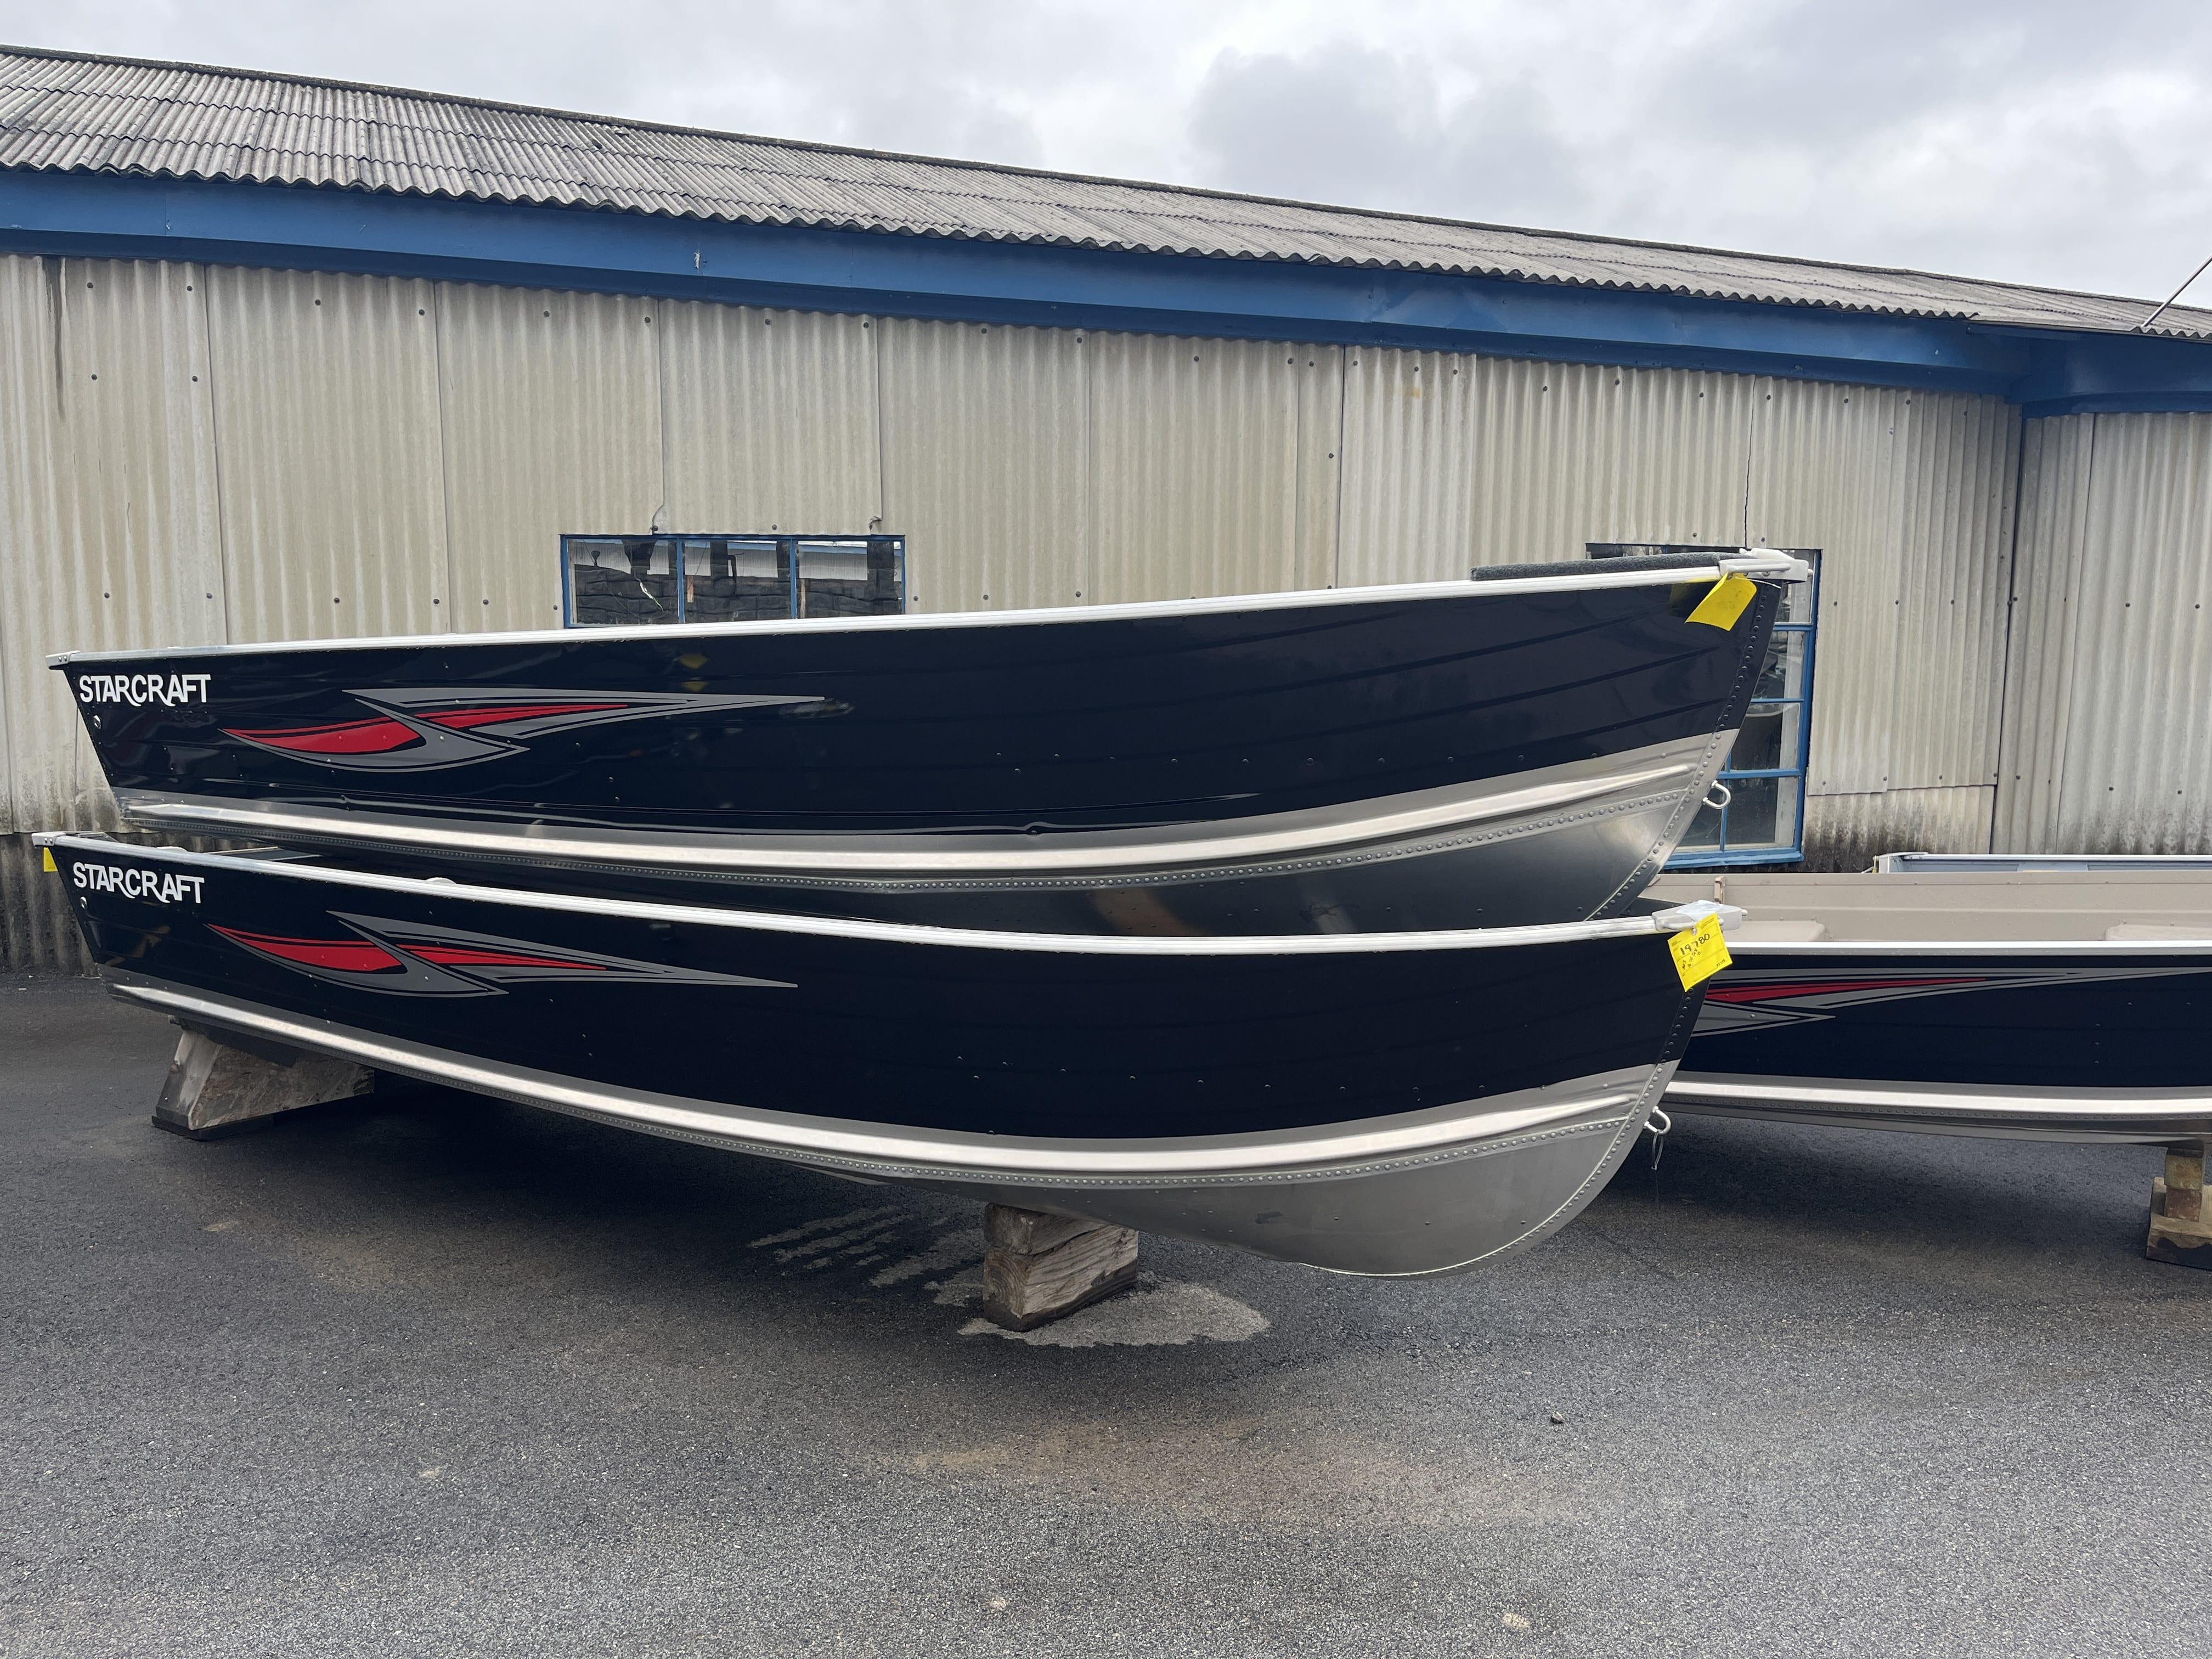 Starcraft 16 SF DLX boats for sale 